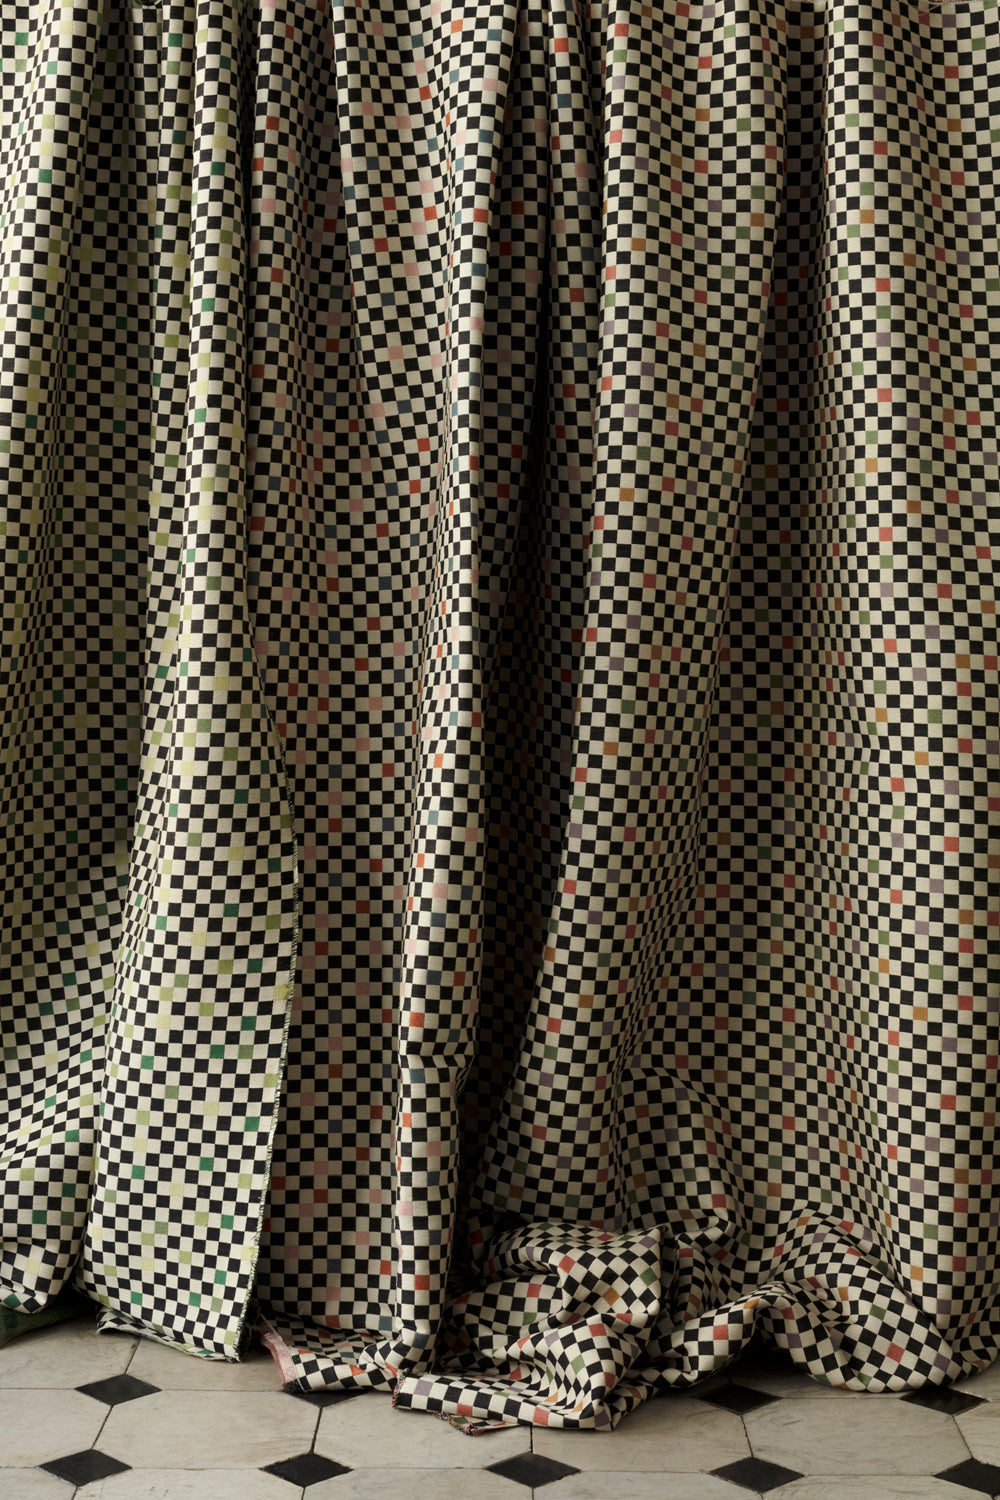 A row of draped jacquard fabrics, all in checked patterns in various colorways.